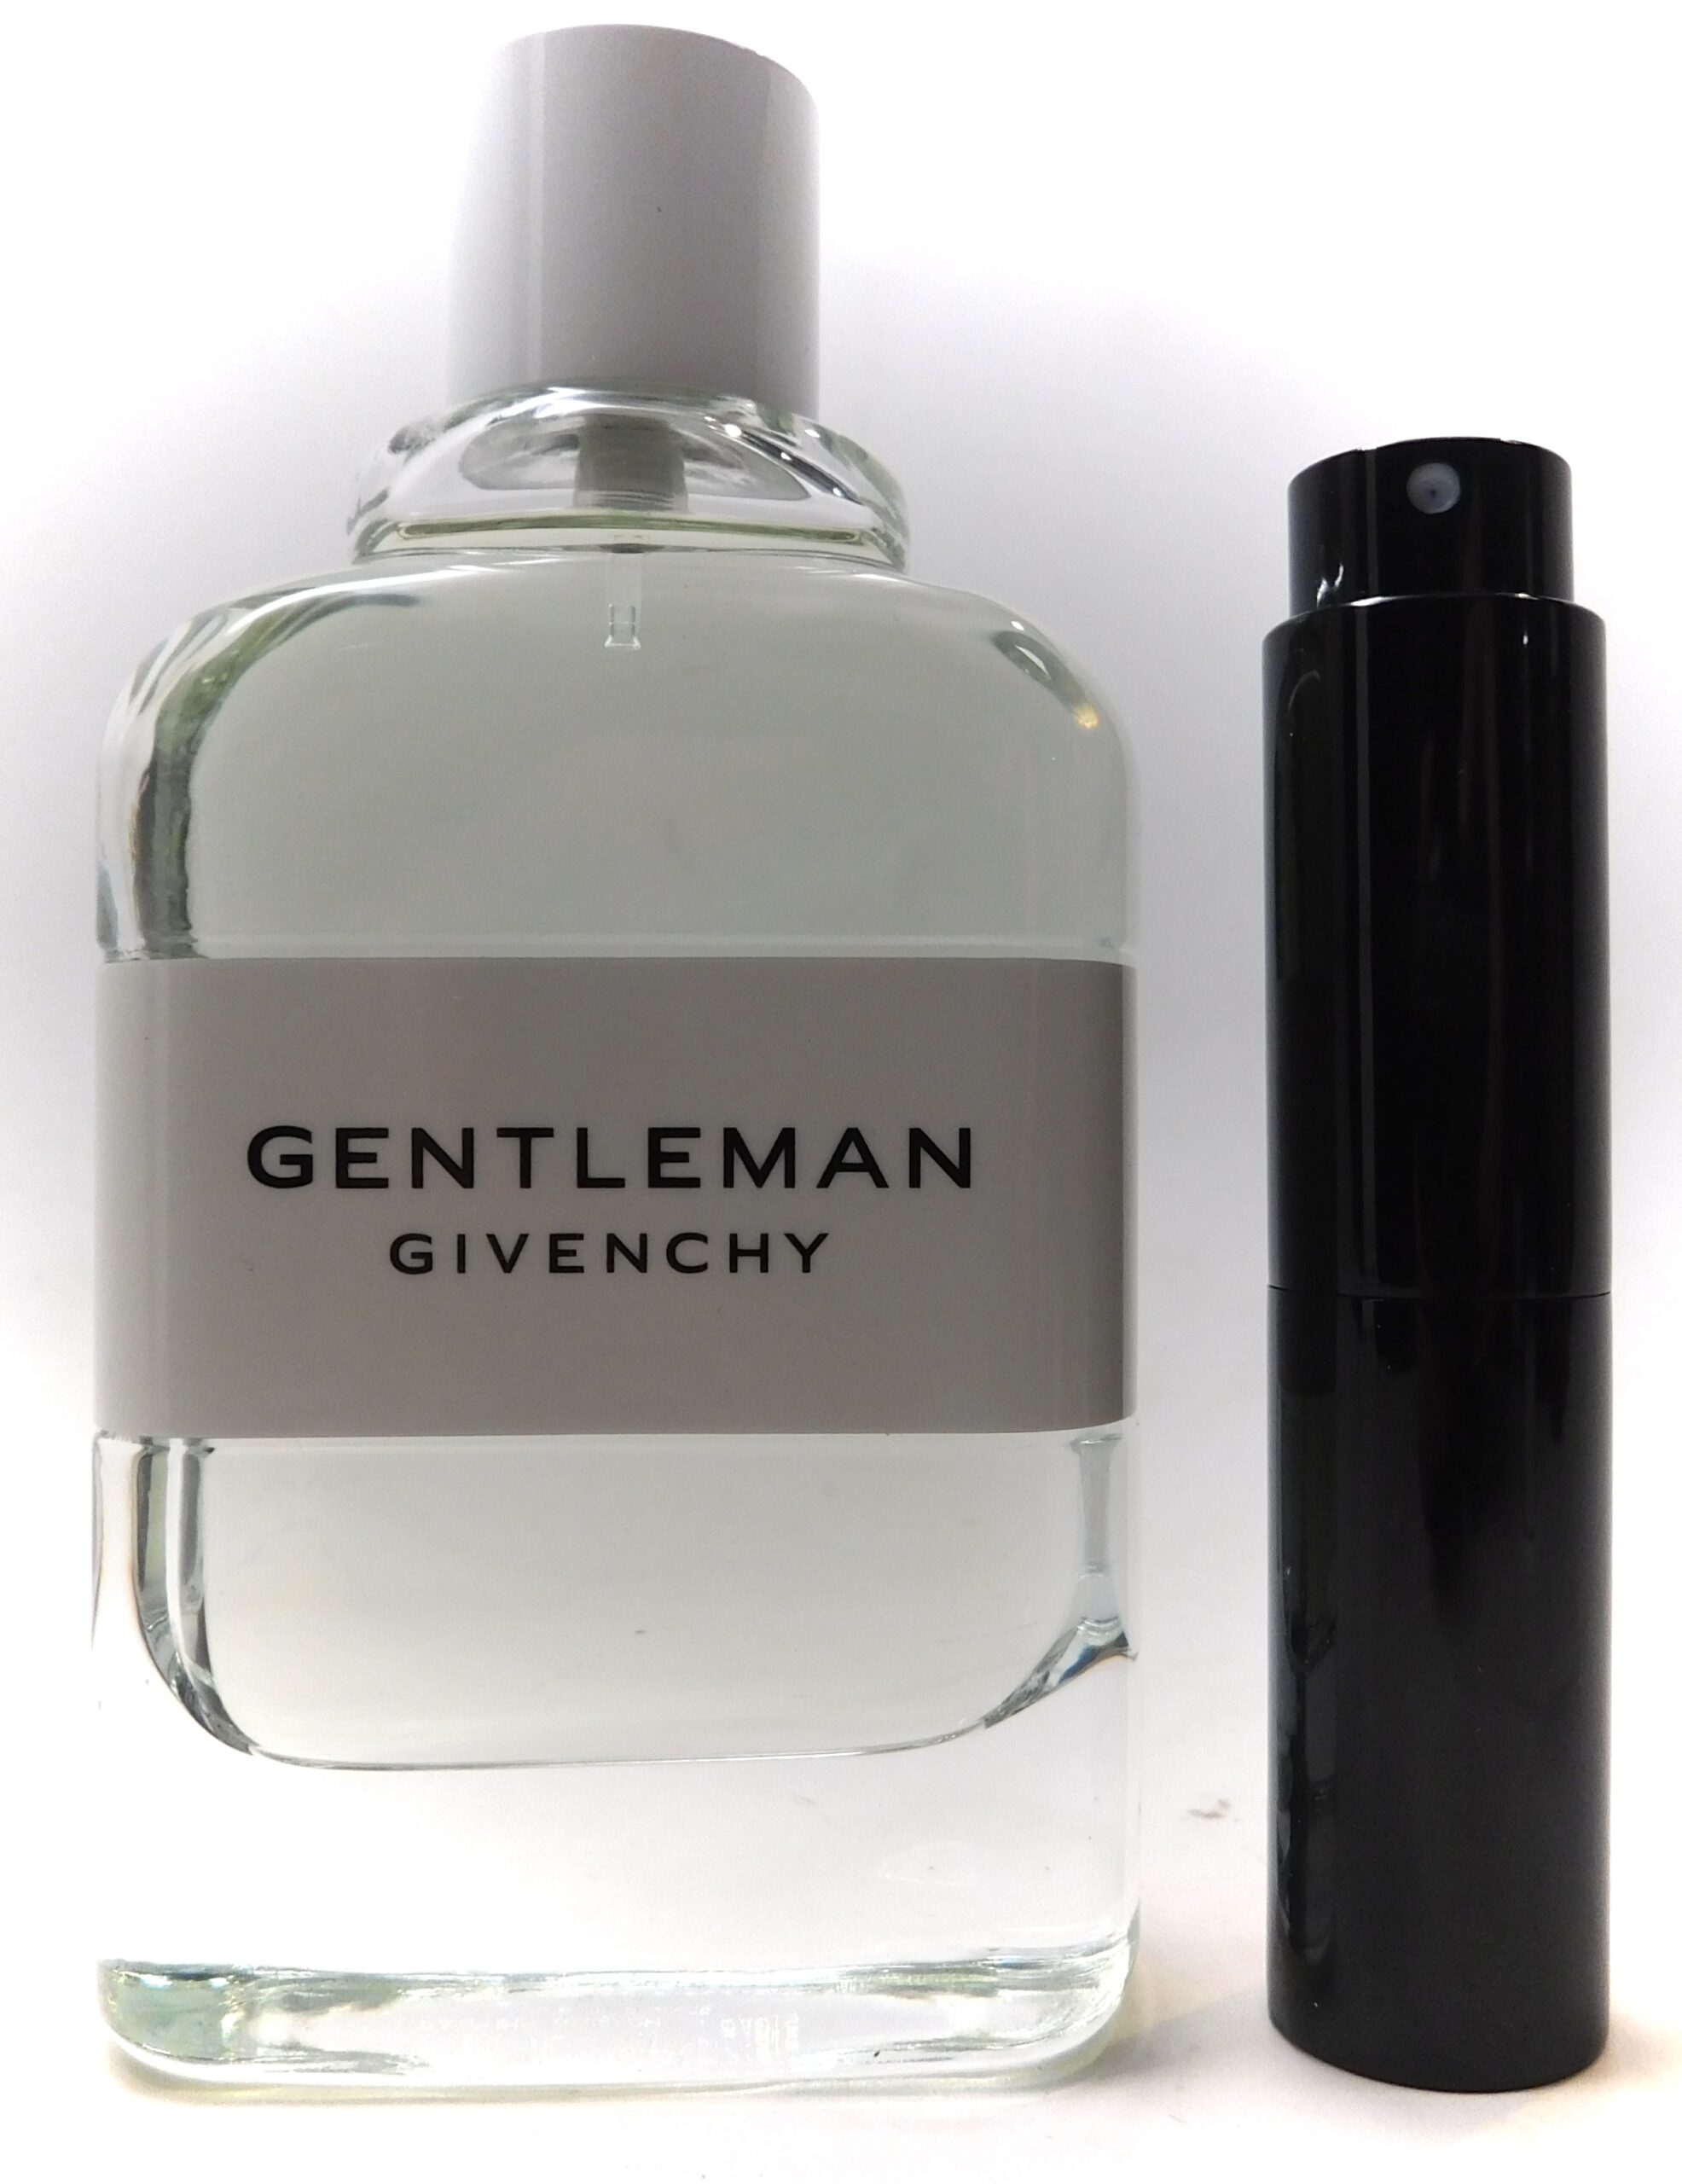 givenchy gentleman cologne 100ml